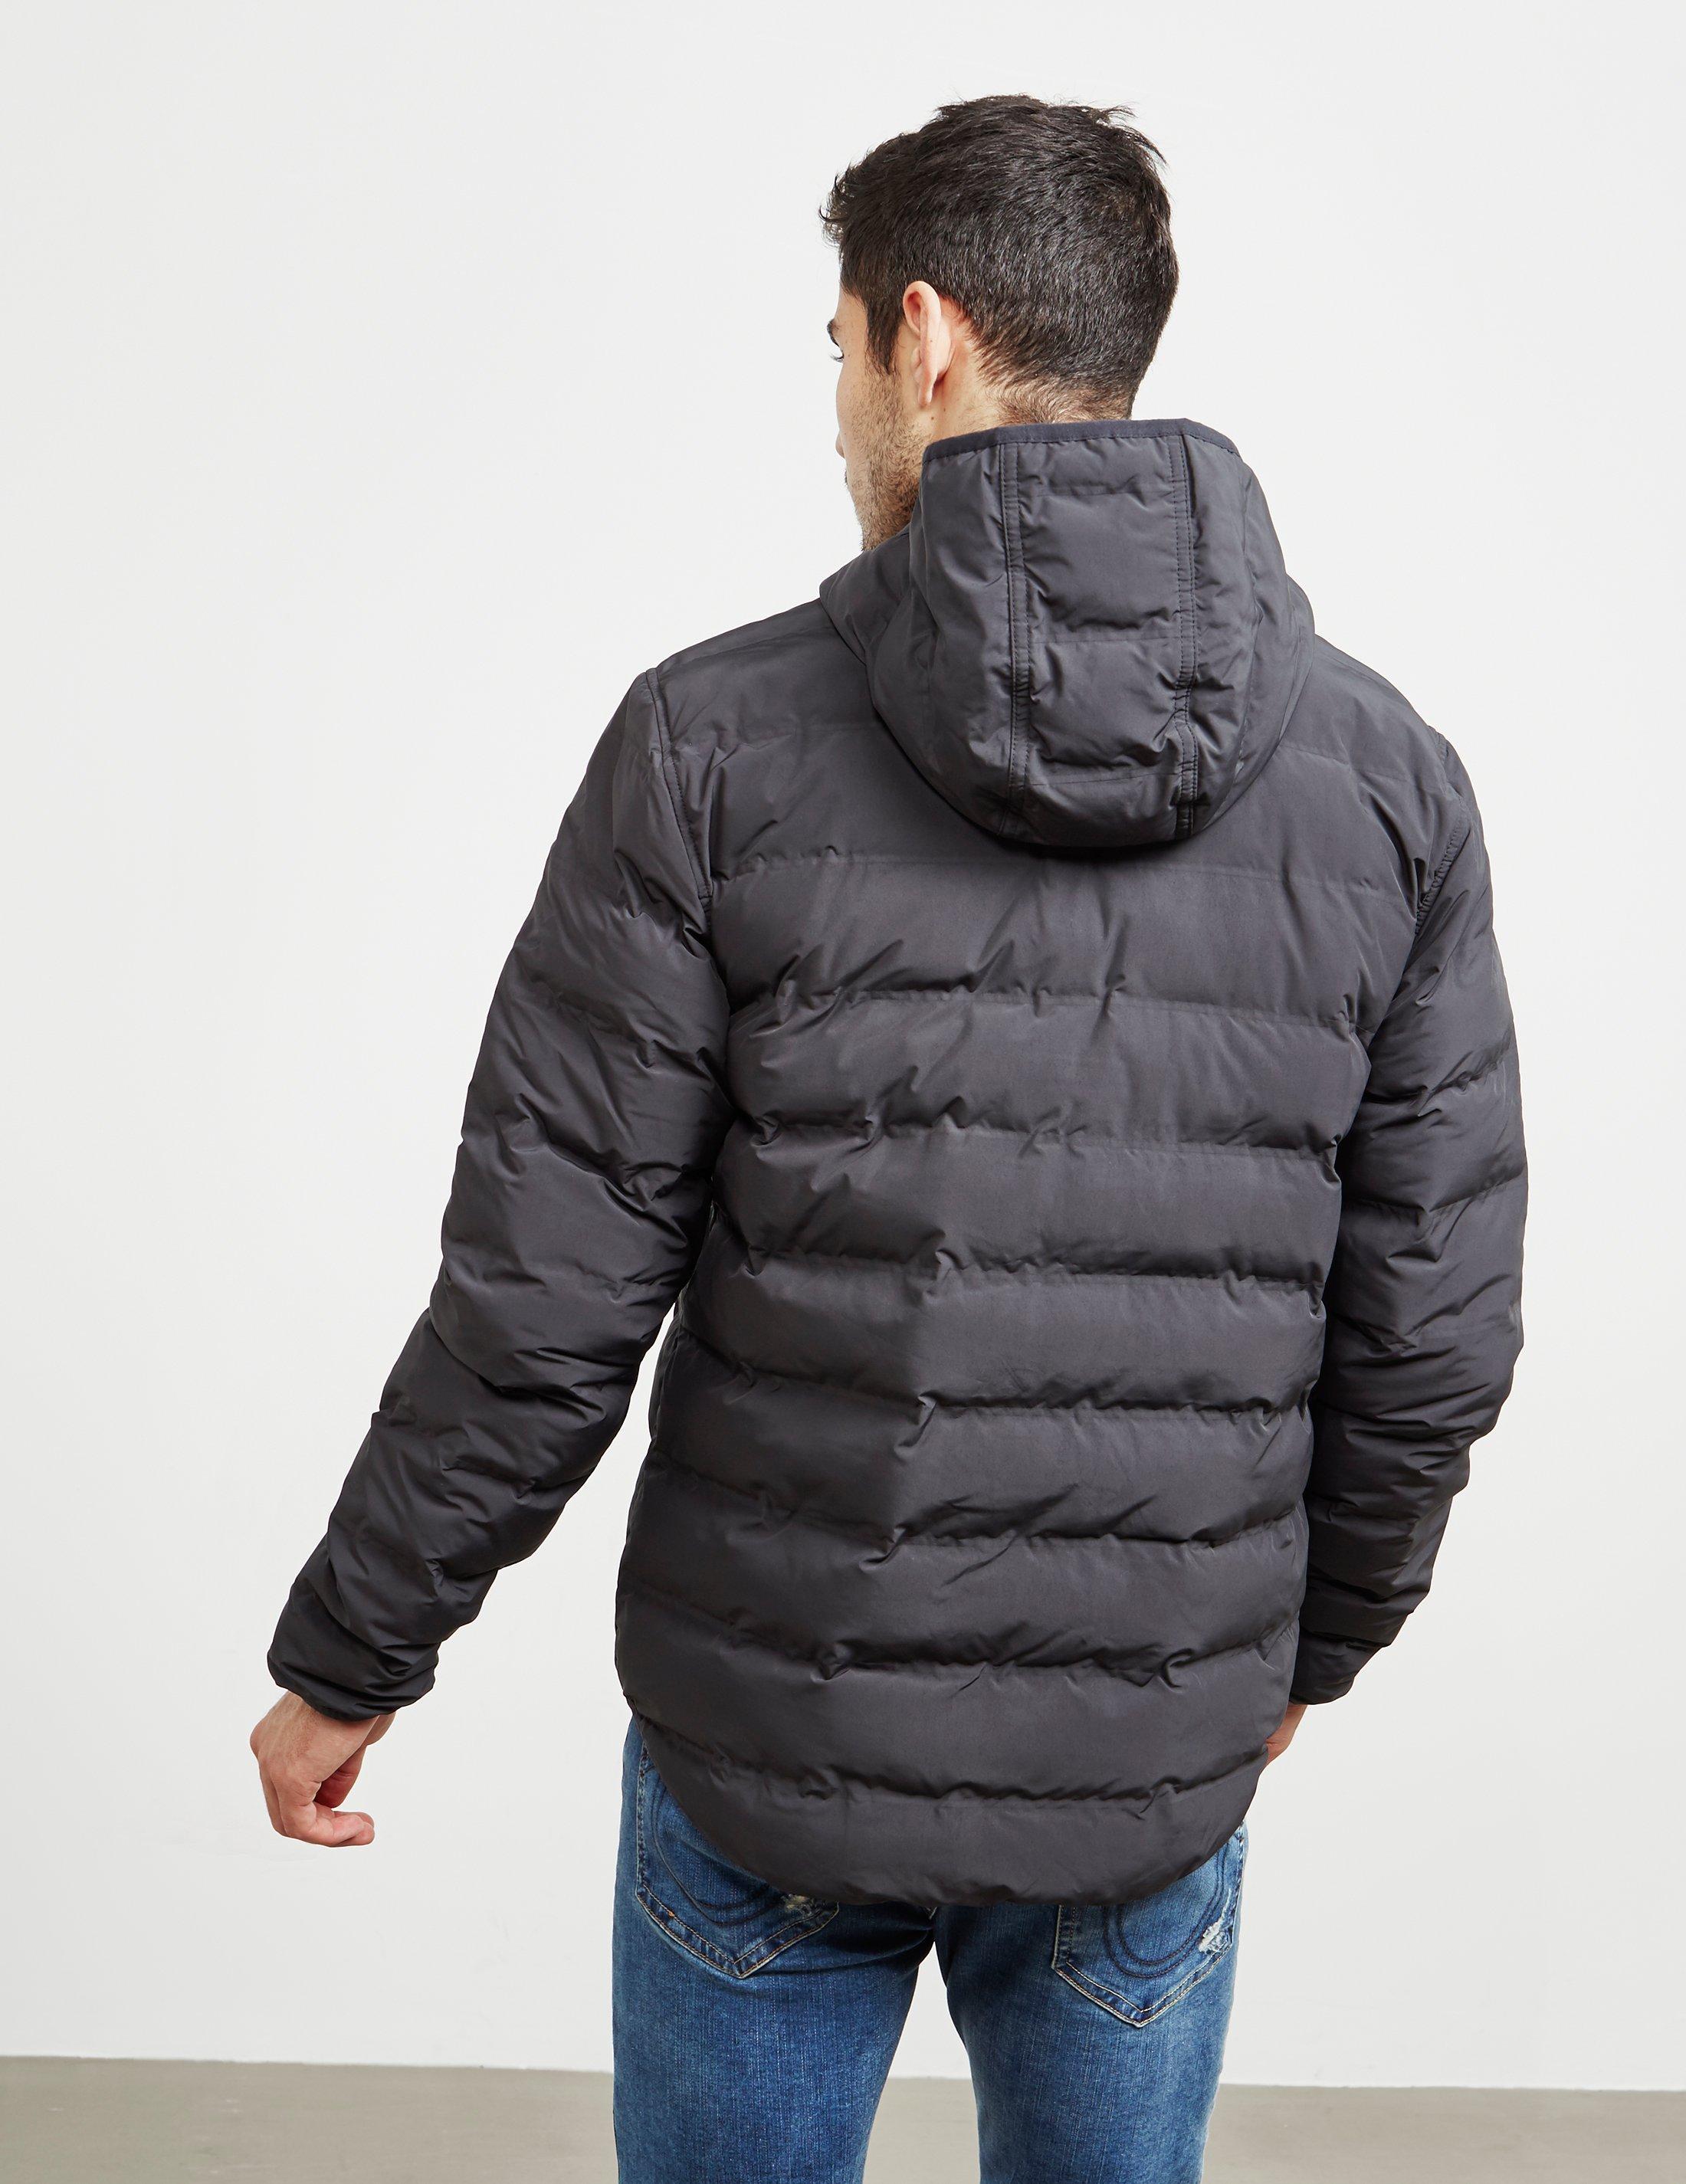 fred perry bubble hooded jacket, Off 65%, www.scrimaglio.com